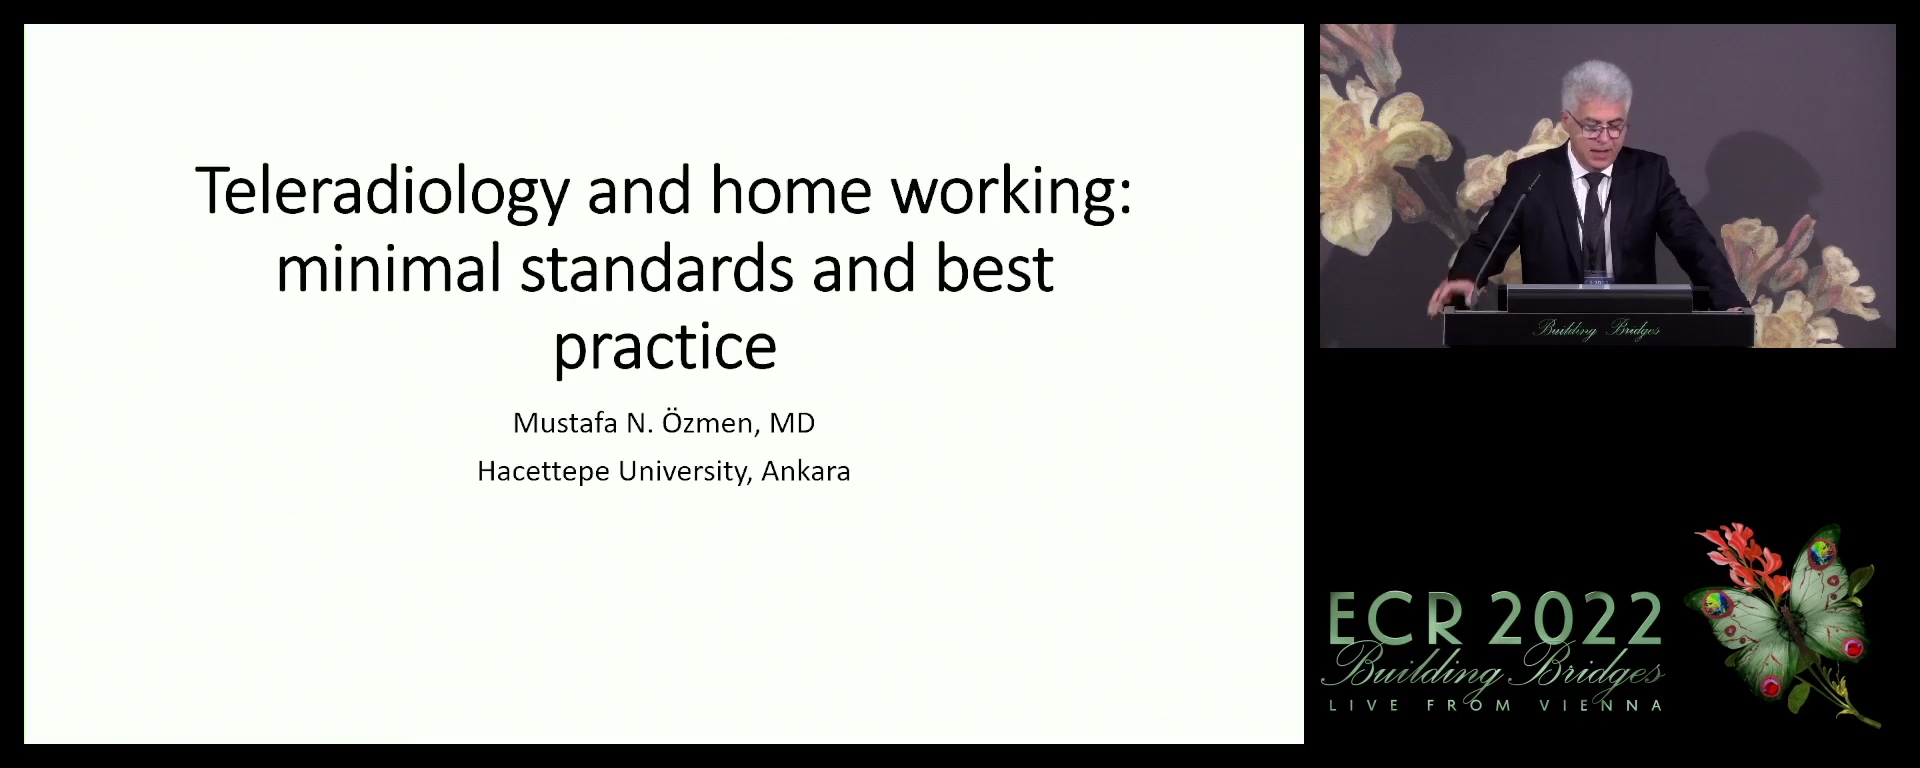 Teleradiology and home working: minimal standards and best practice